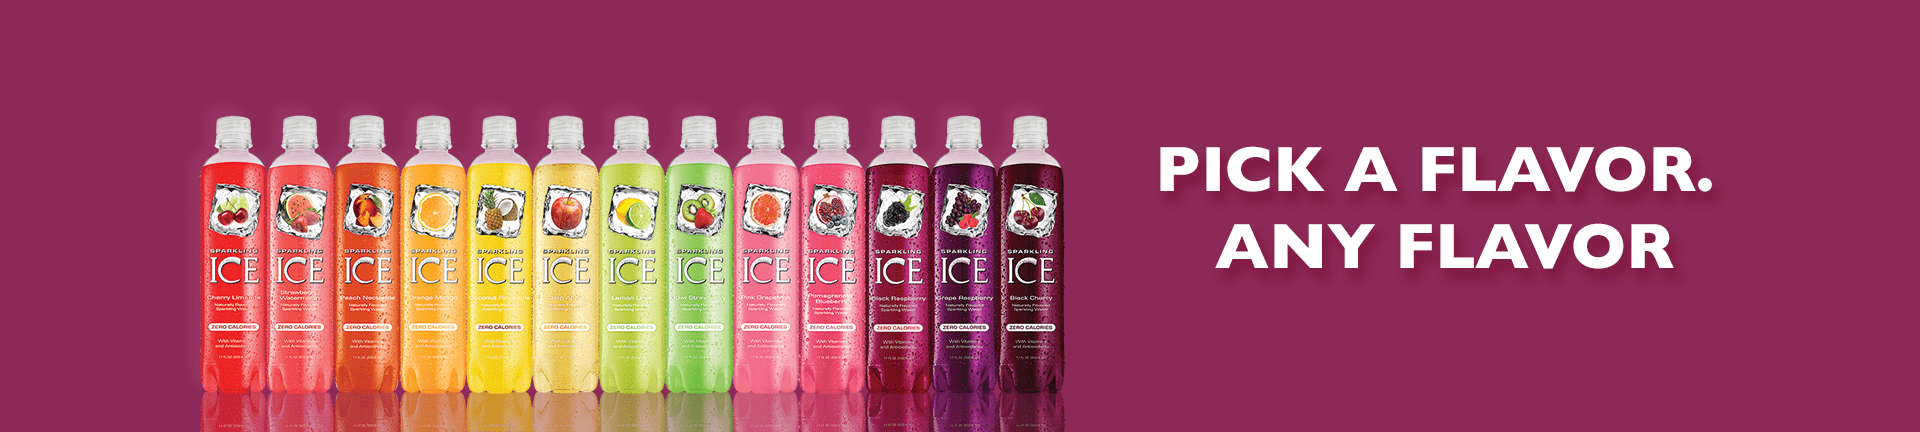 Sparkling Ice bottle lineup